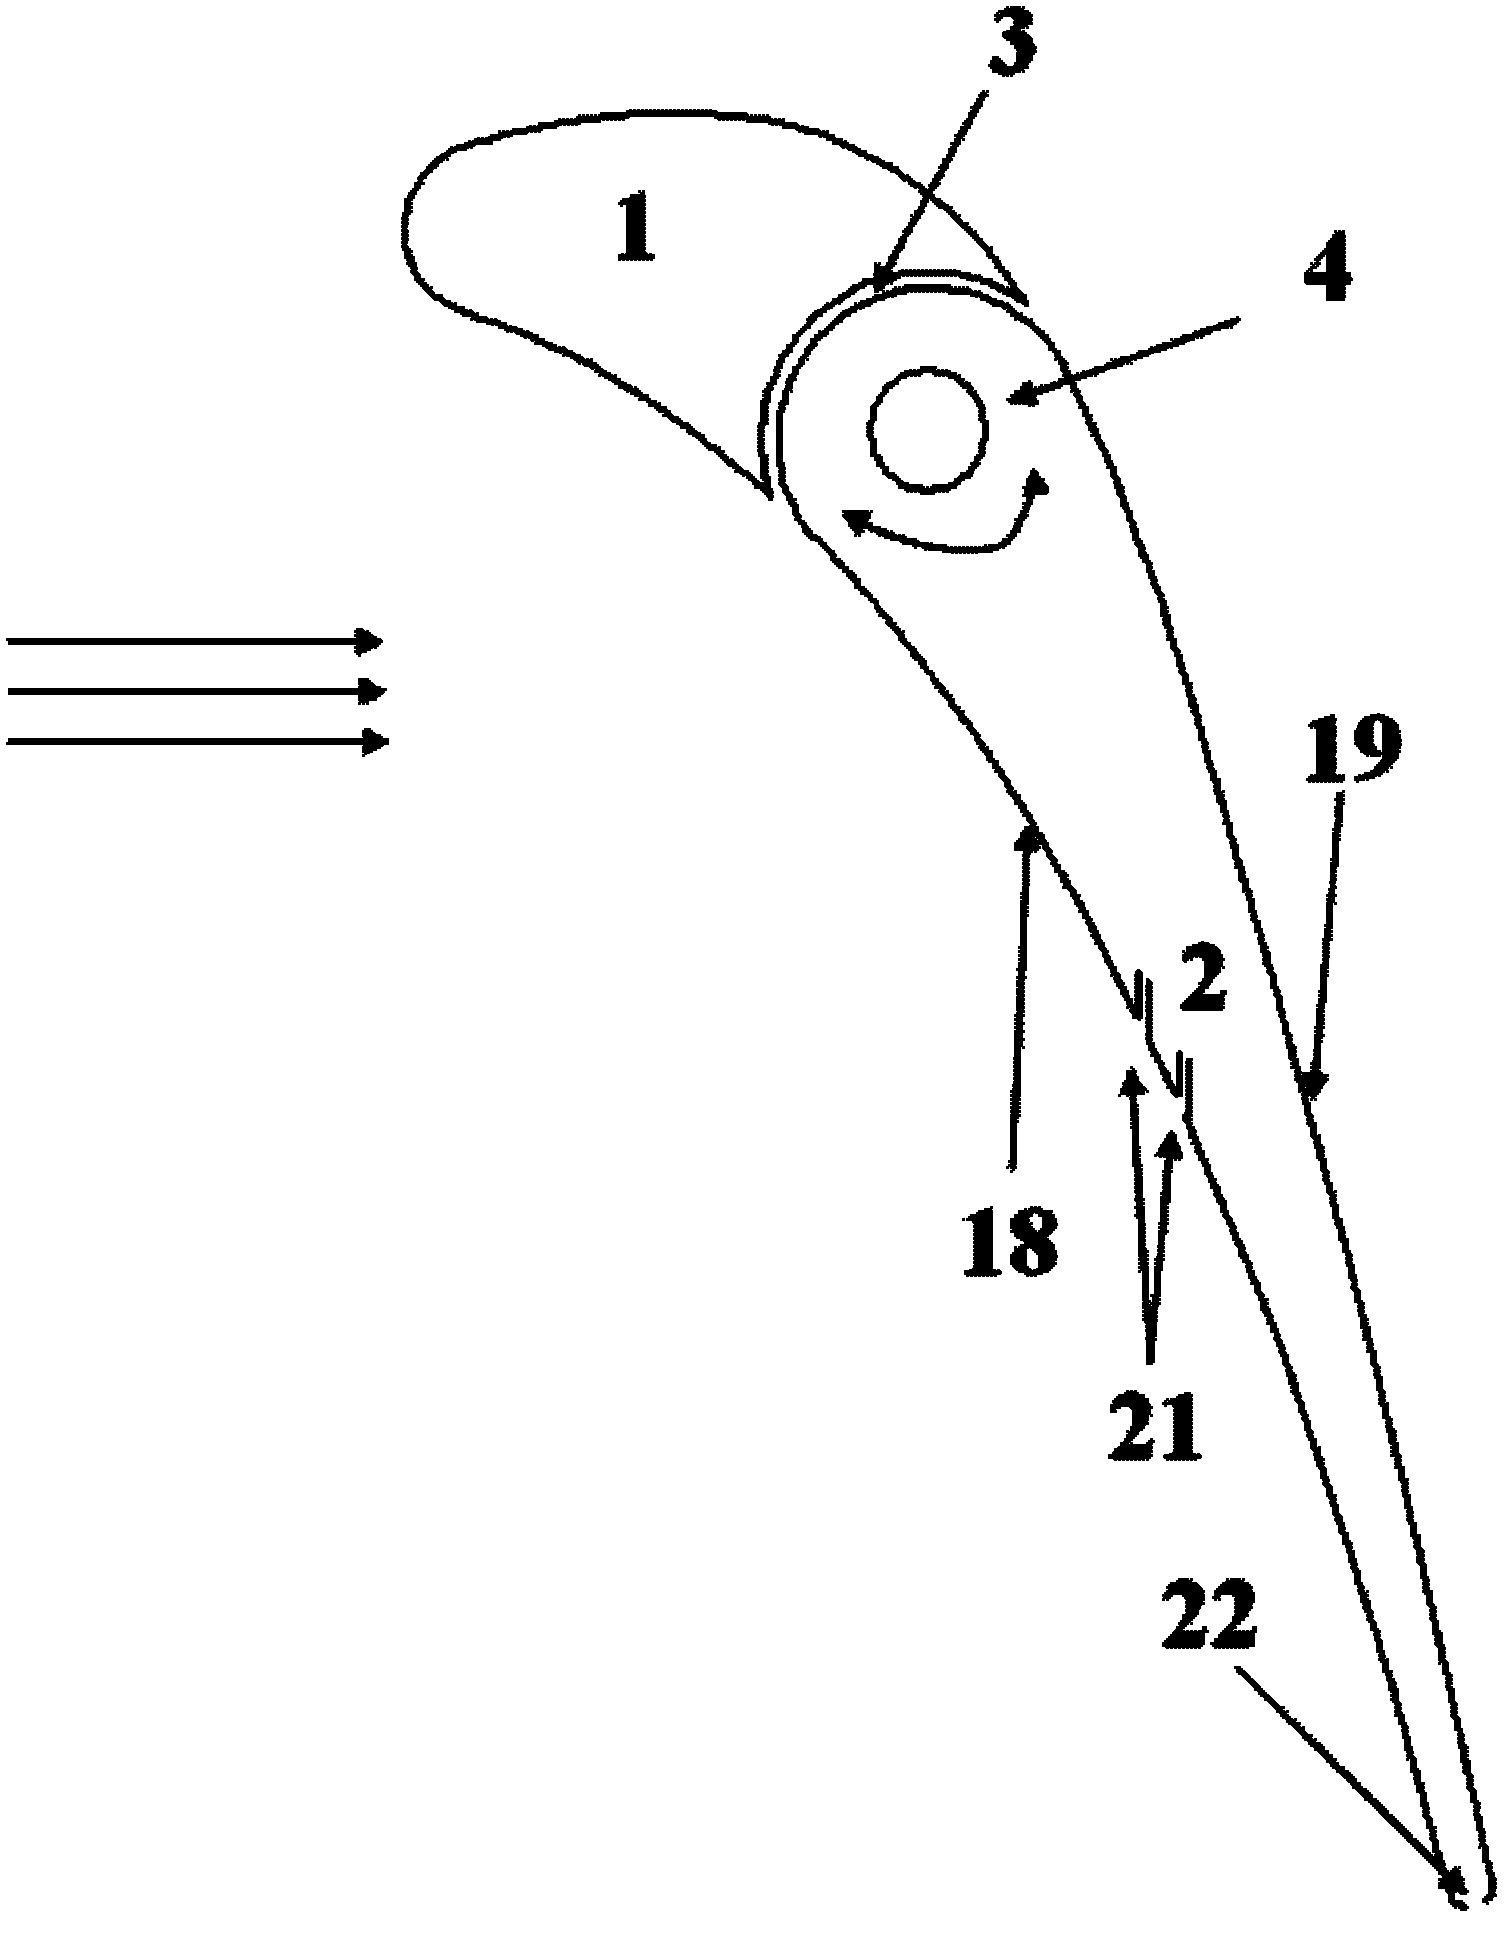 Cooling method used for segmented geometric adjustment of guide vanes of gas turbine